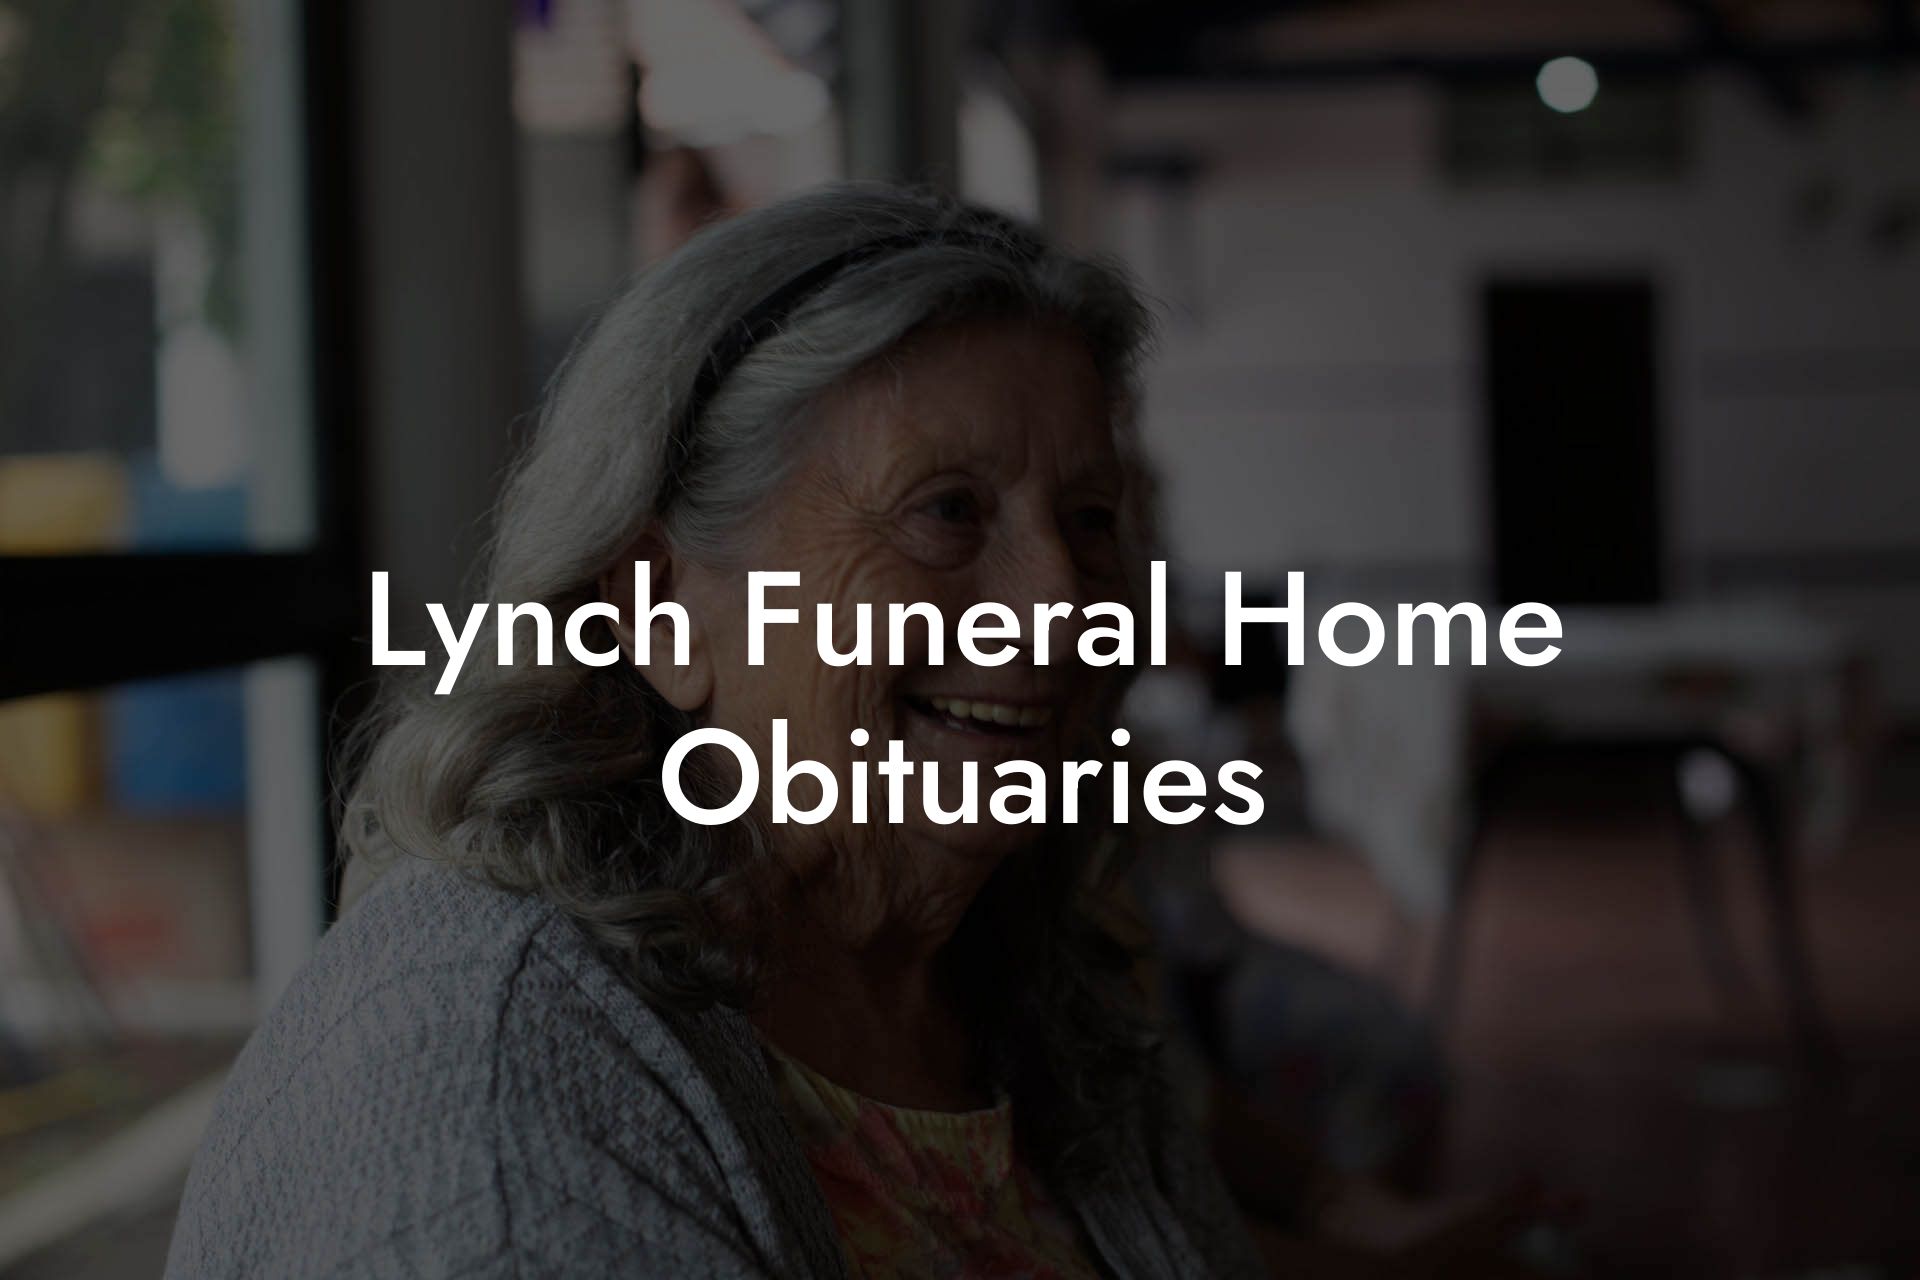 Lynch Funeral Home Obituaries